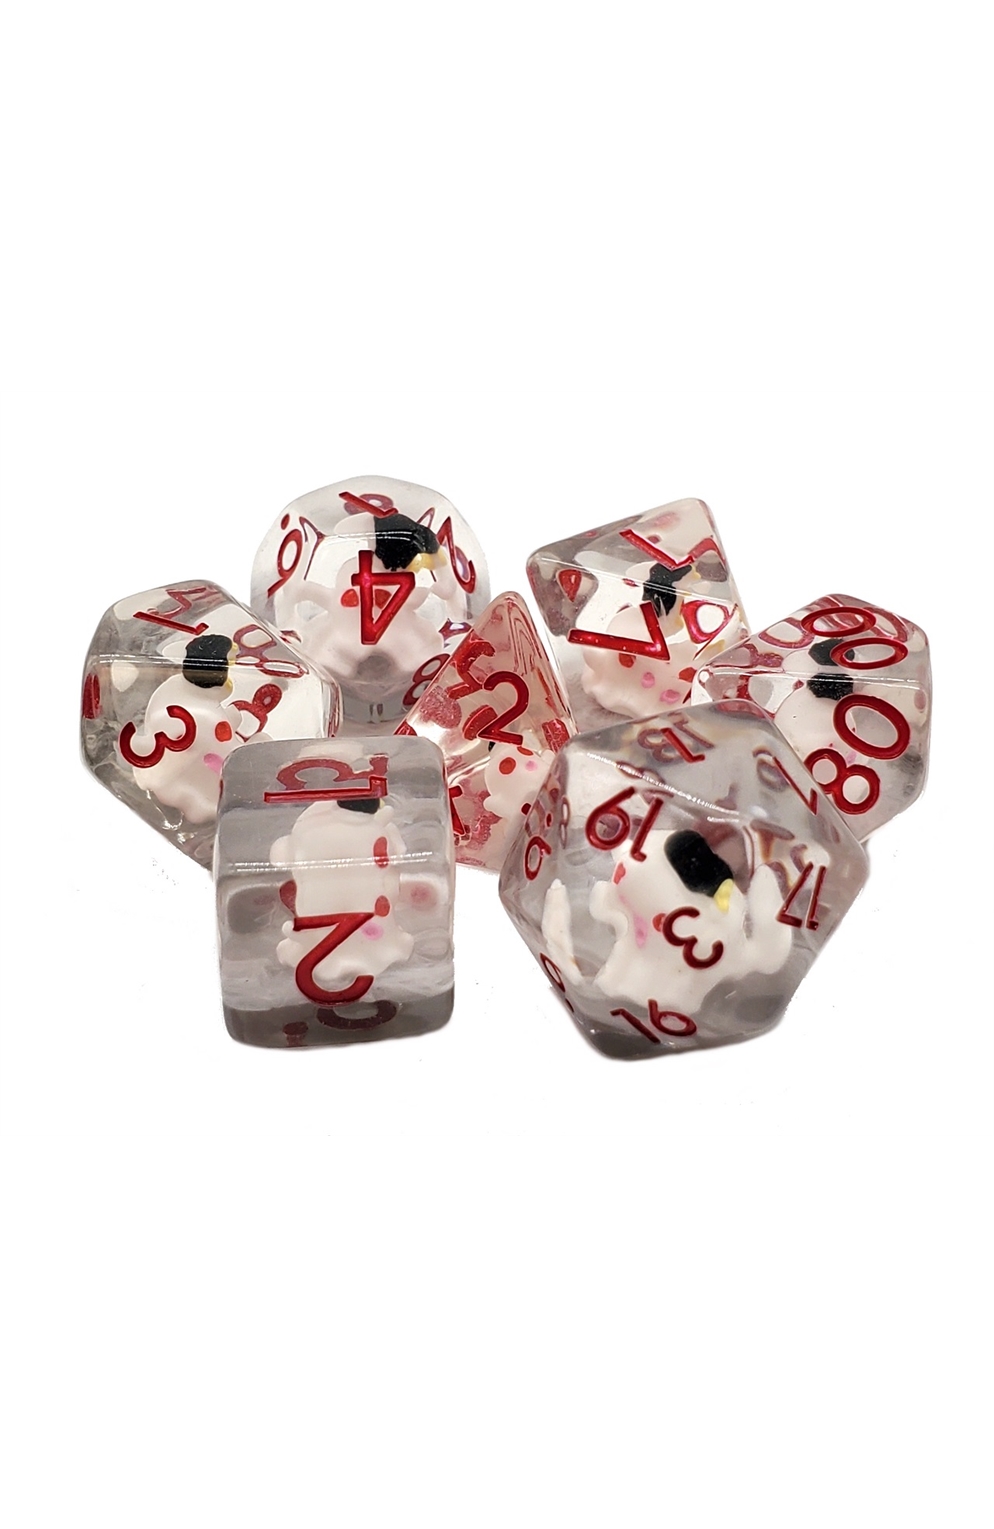 Old School 7 Piece Dnd Rpg Dice Set: Infused - Ghost - White